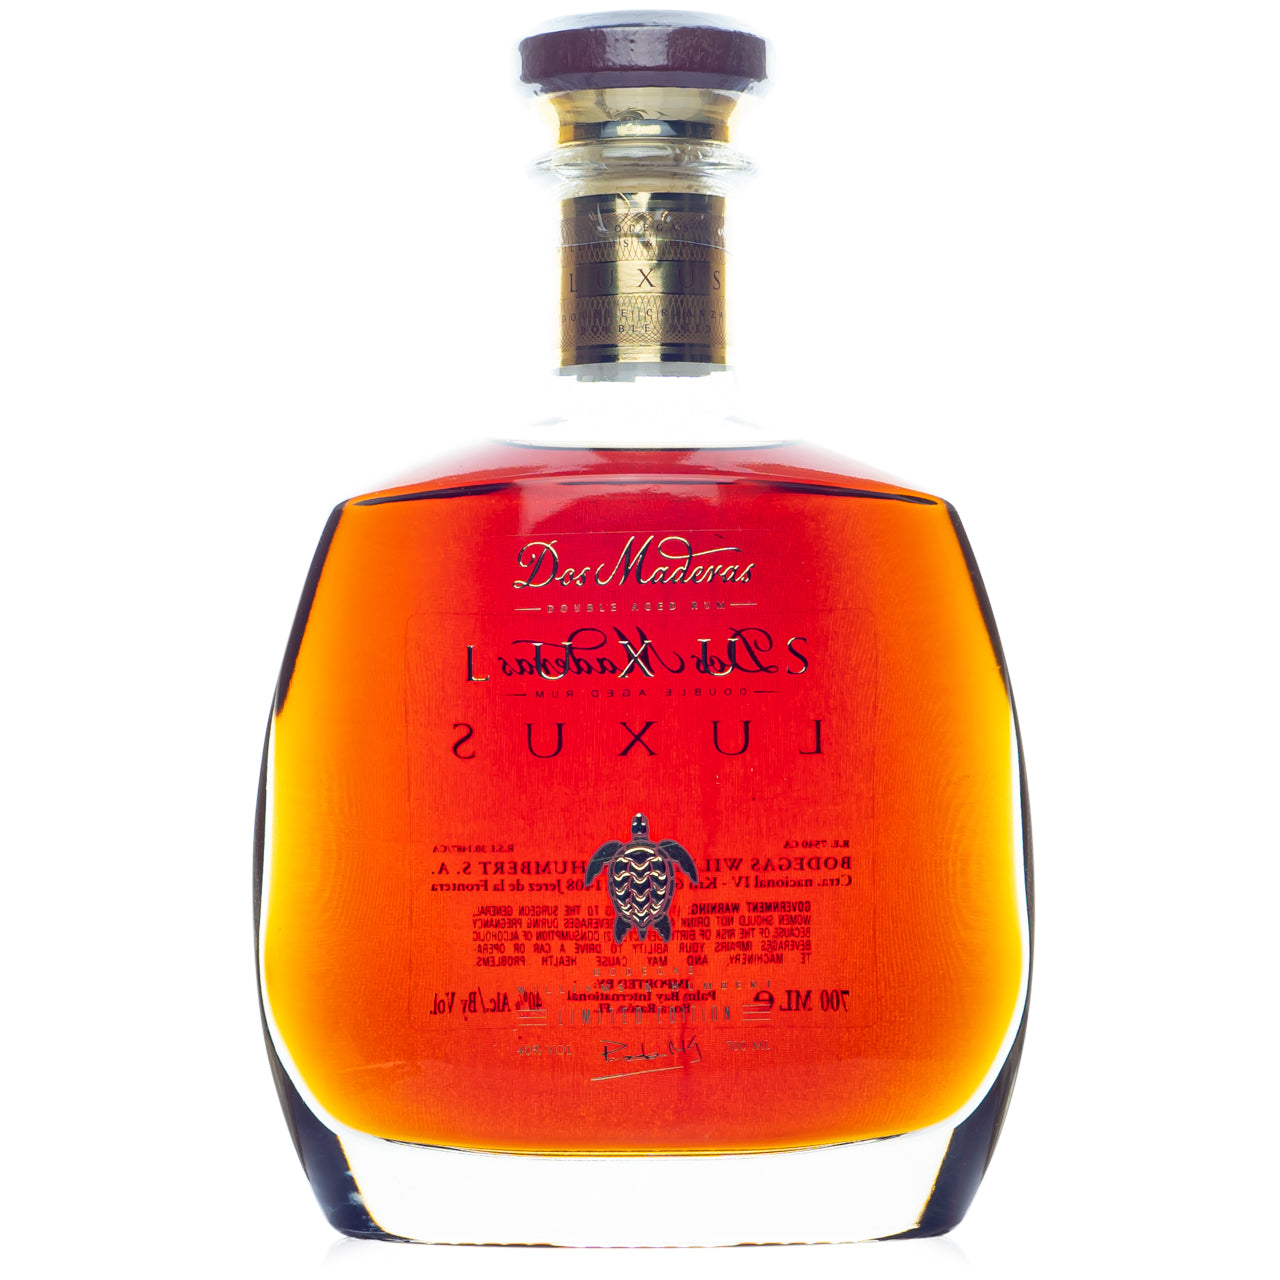 Dos Maderas Luxus Double Aged Rum